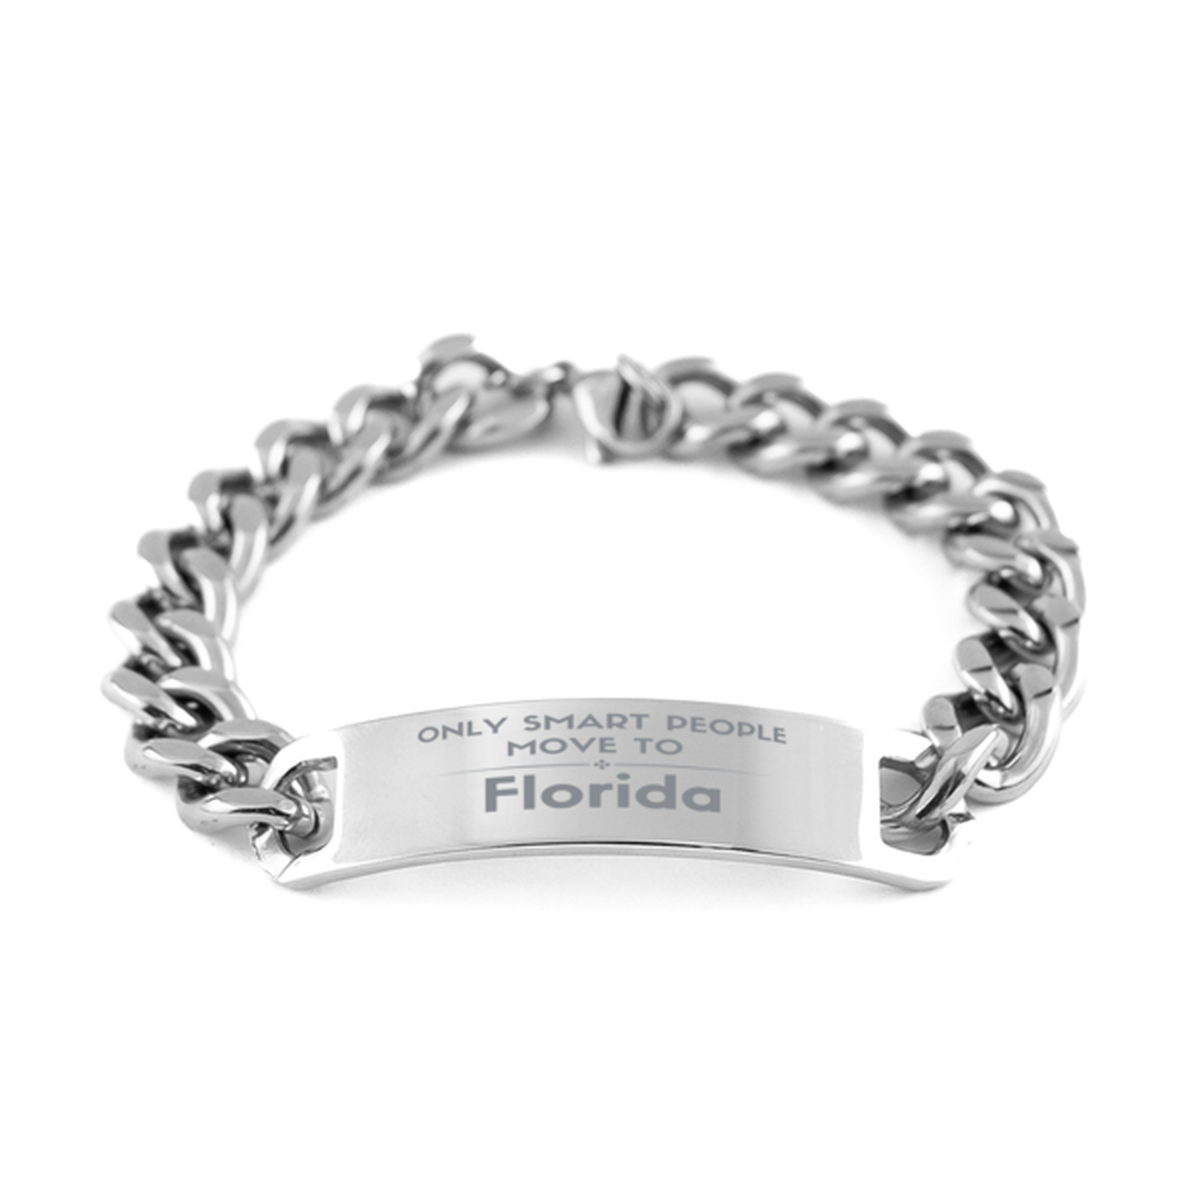 Only smart people move to Florida Cuban Chain Stainless Steel Bracelet, Gag Gifts For Florida, Move to Florida Gifts for Friends Coworker Funny Saying Quote